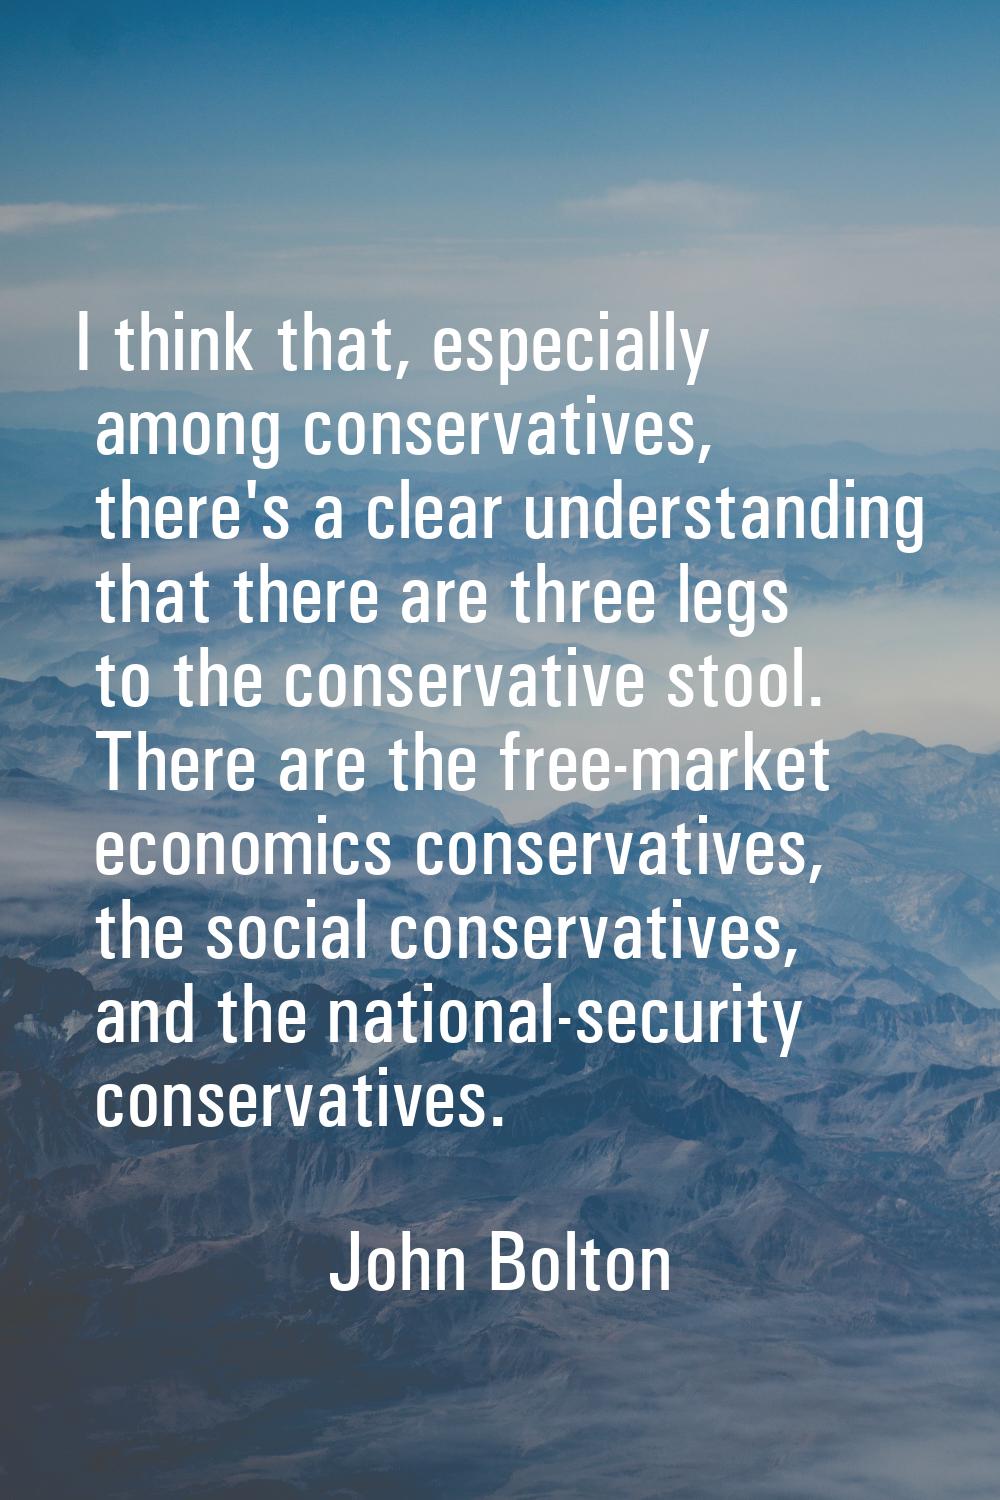 I think that, especially among conservatives, there's a clear understanding that there are three le